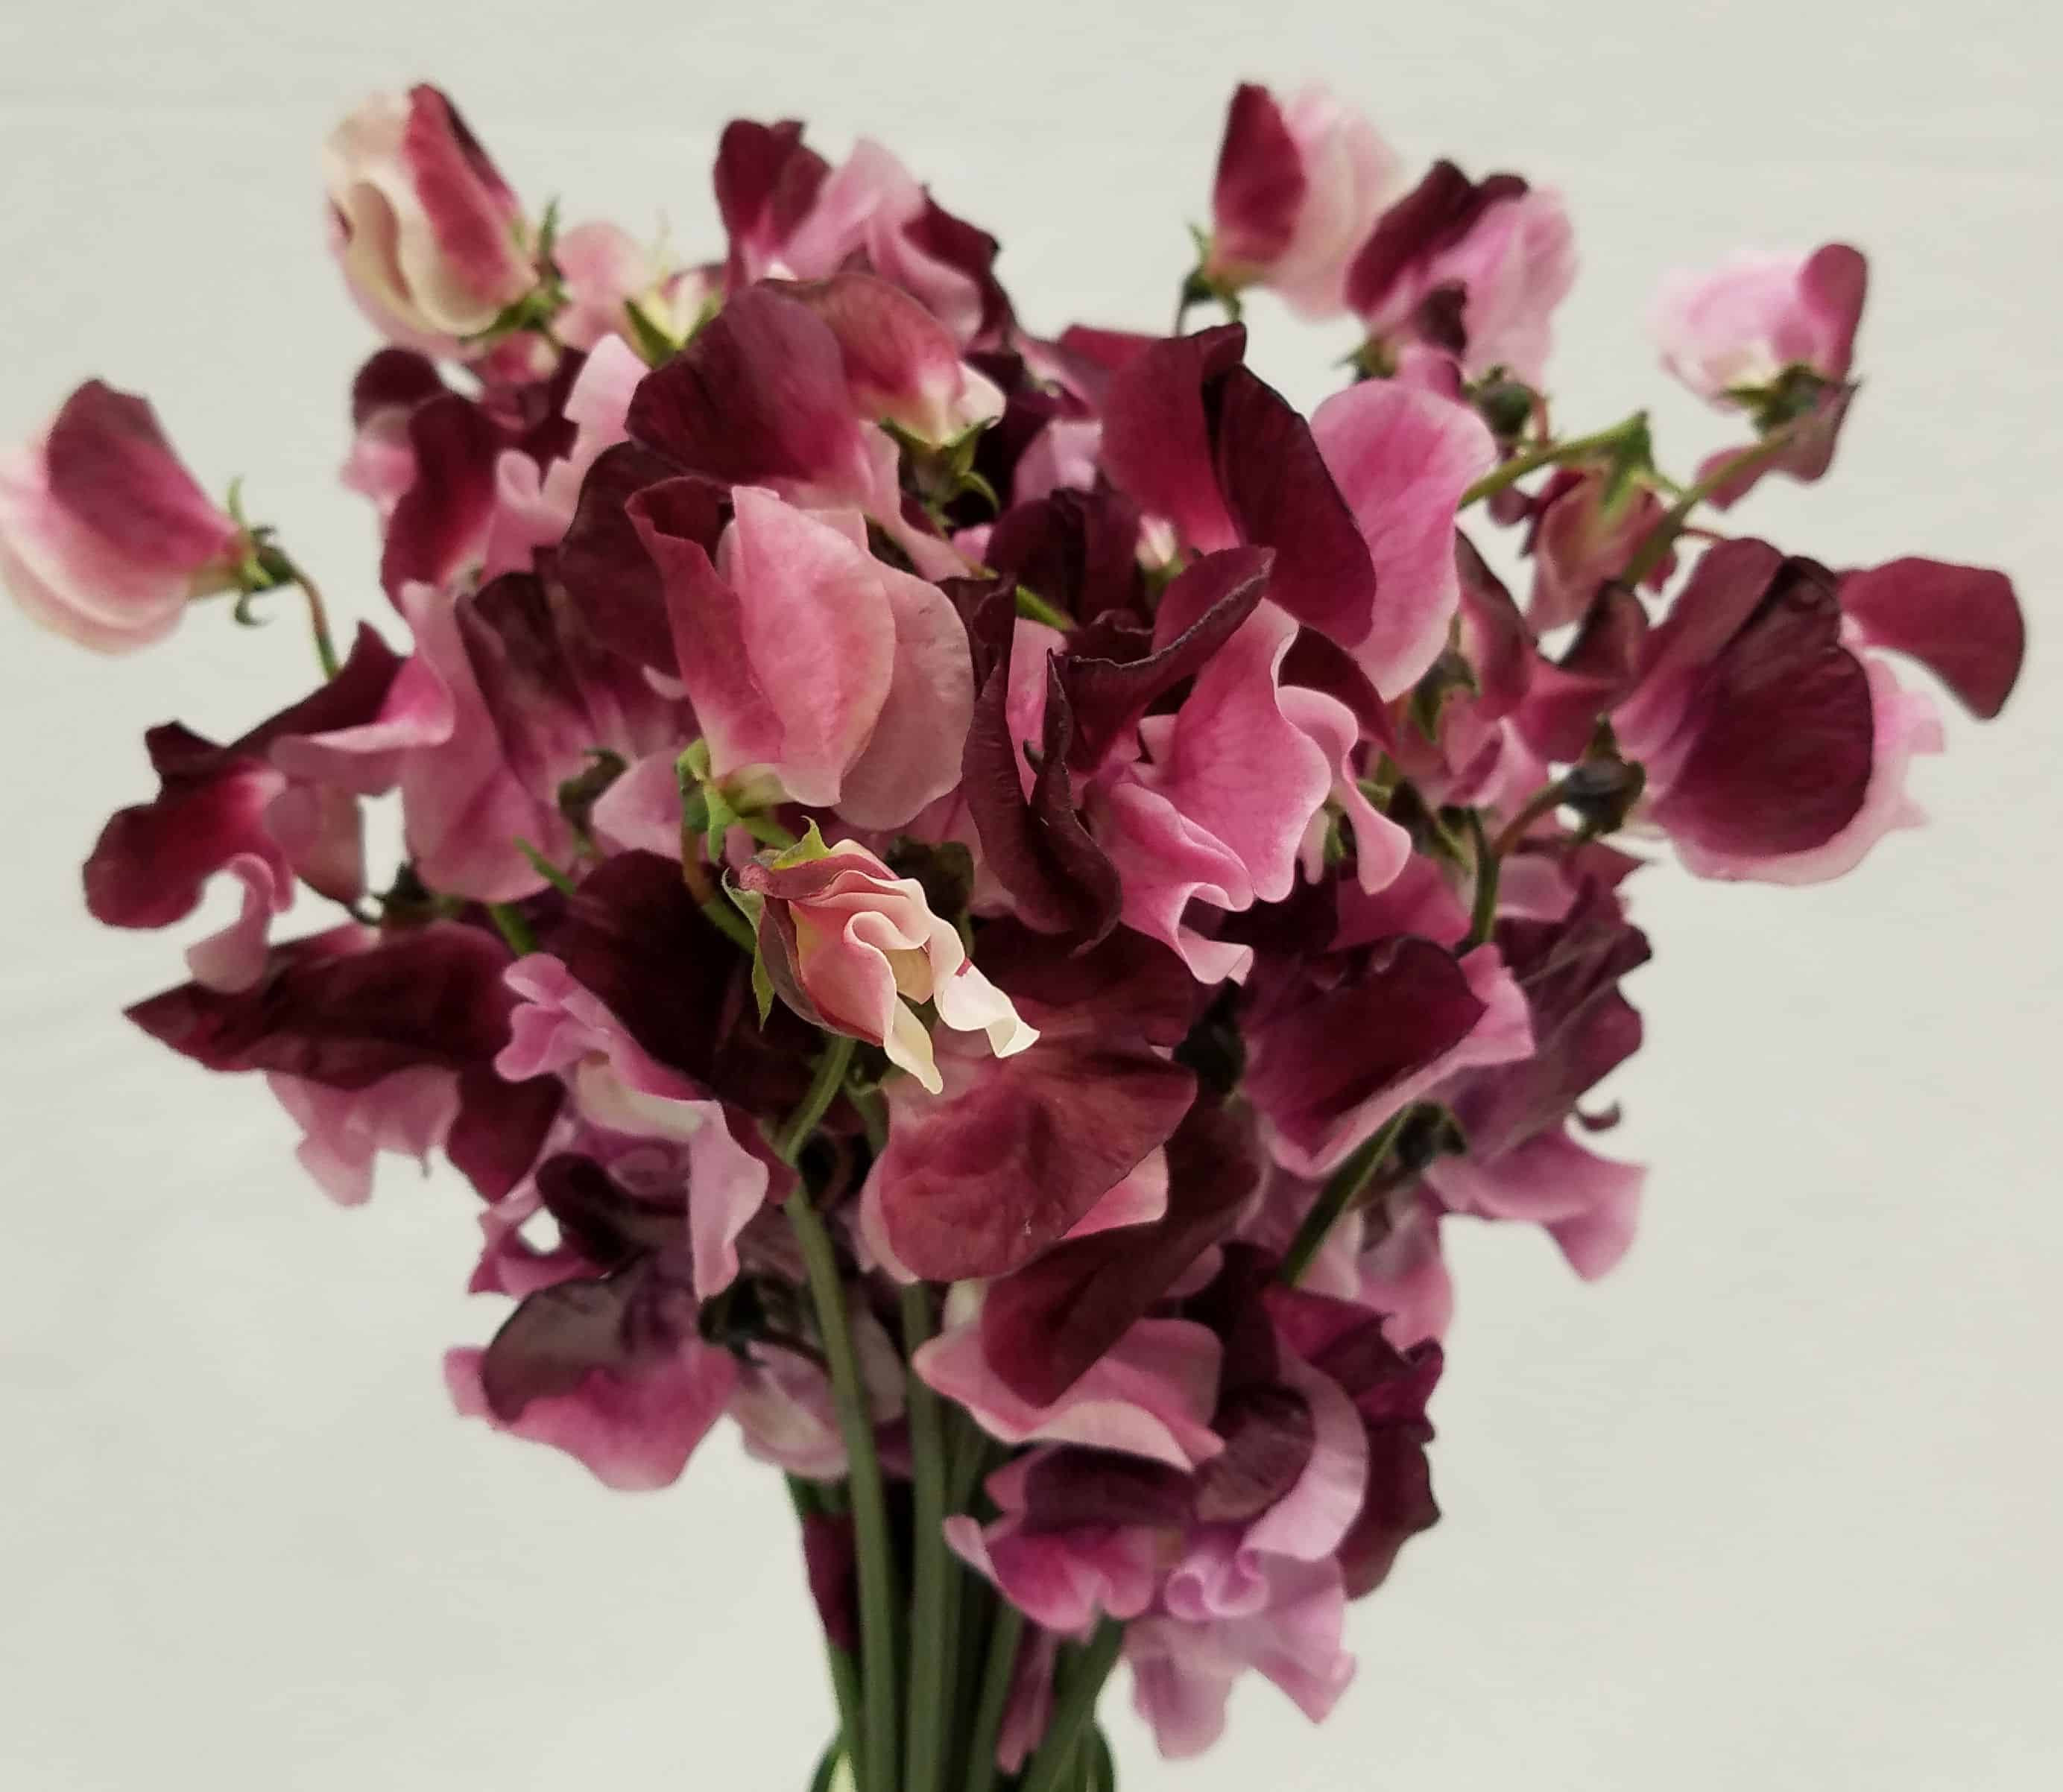 27 Great Antique Hyacinth Vases for Sale 2023 free download antique hyacinth vases for sale of mayesh wholesale florist business tech throughout benishikibu sweet peas